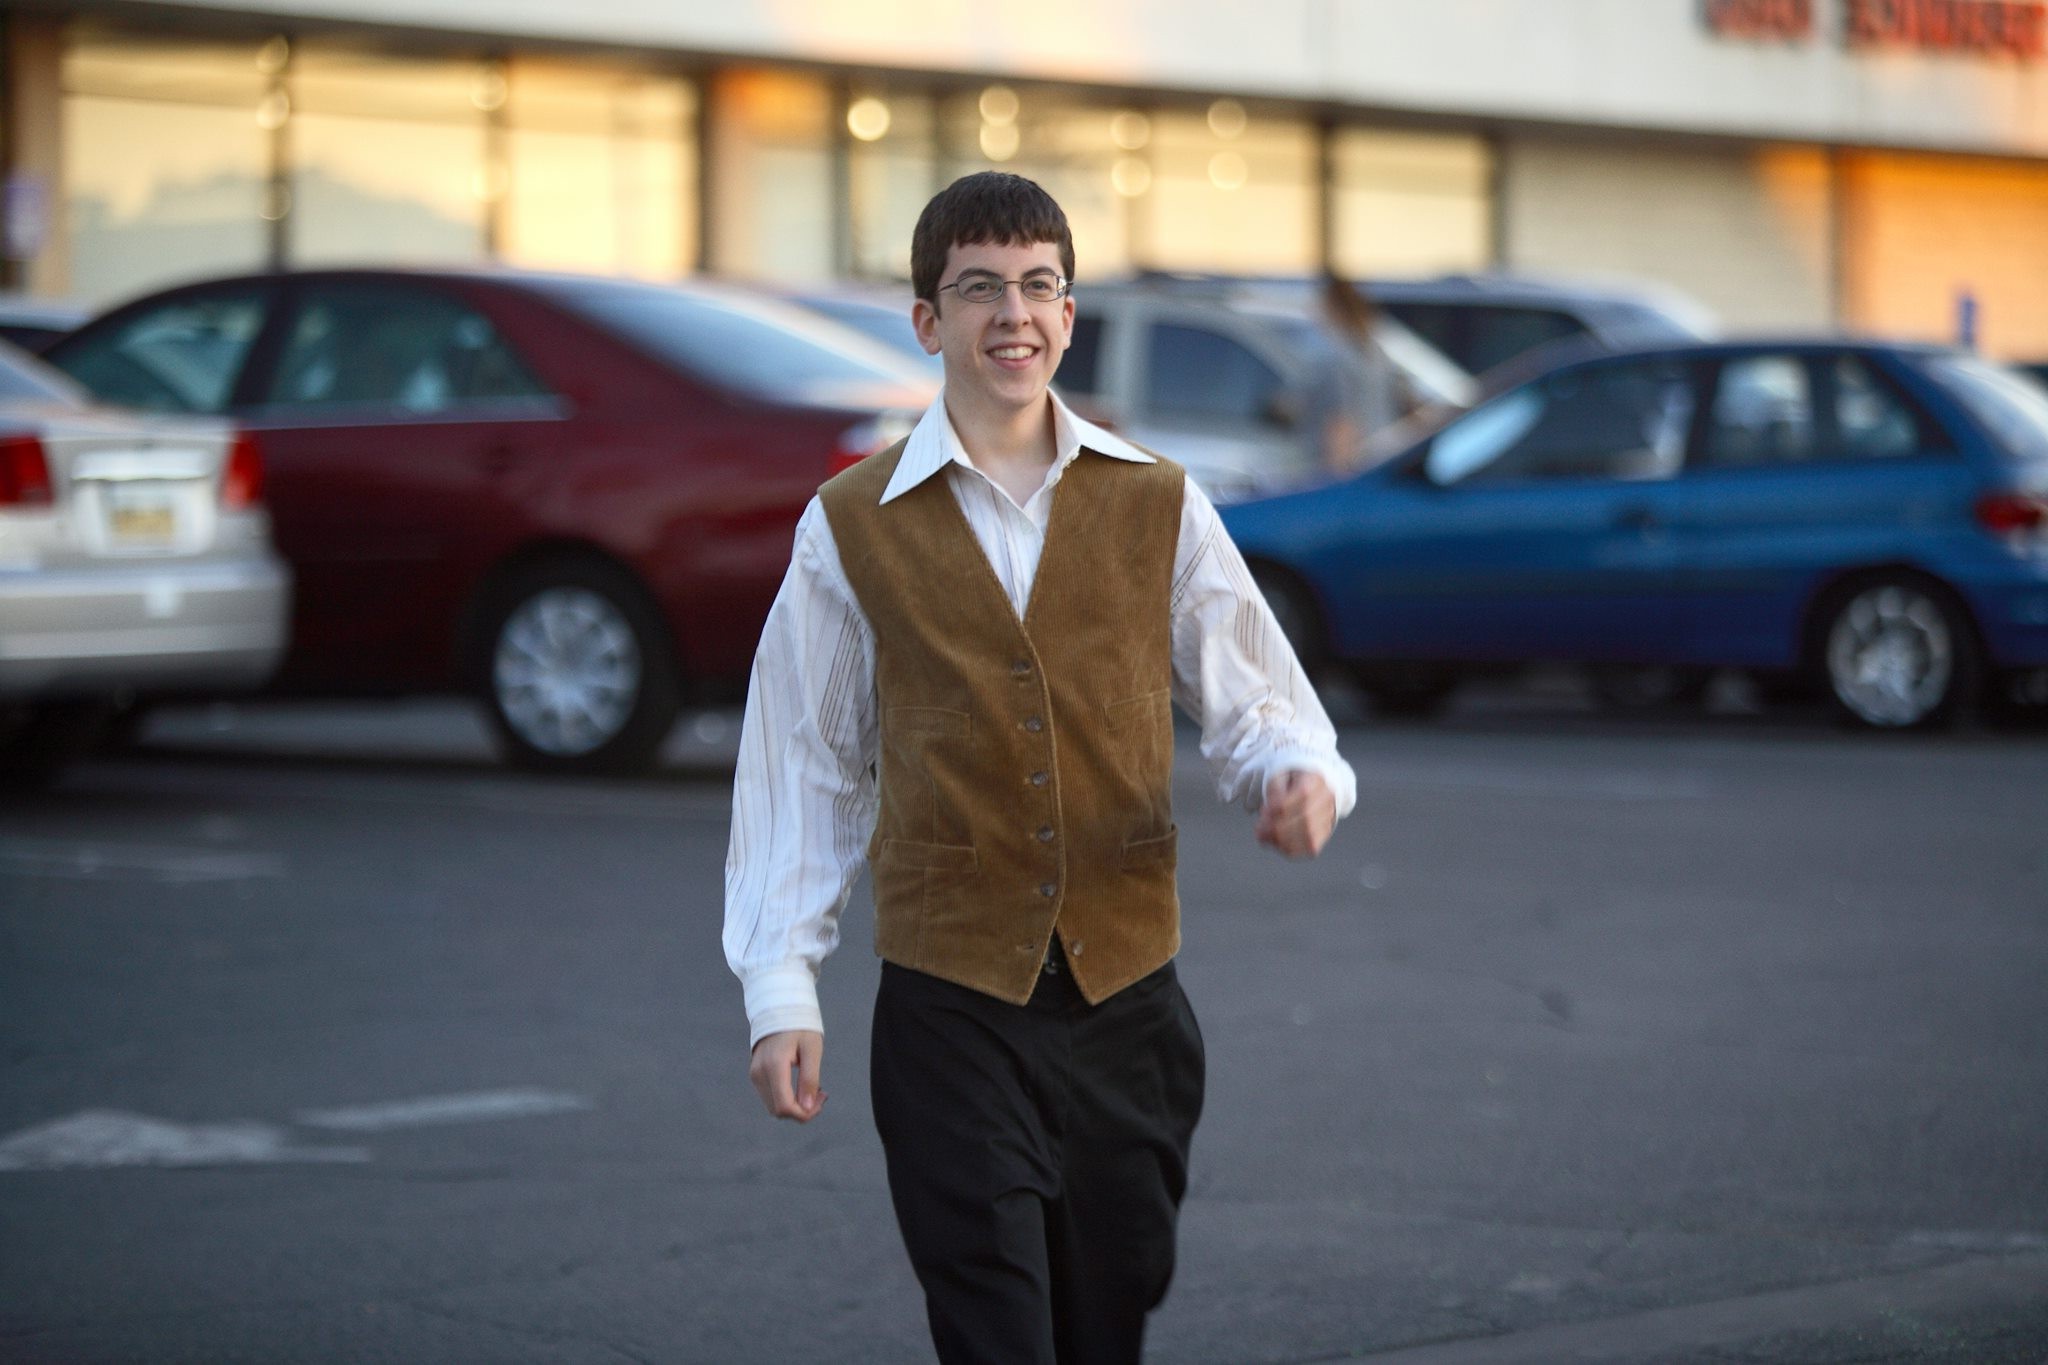 Superbad 2 Should Be All Female, Says McLovin.